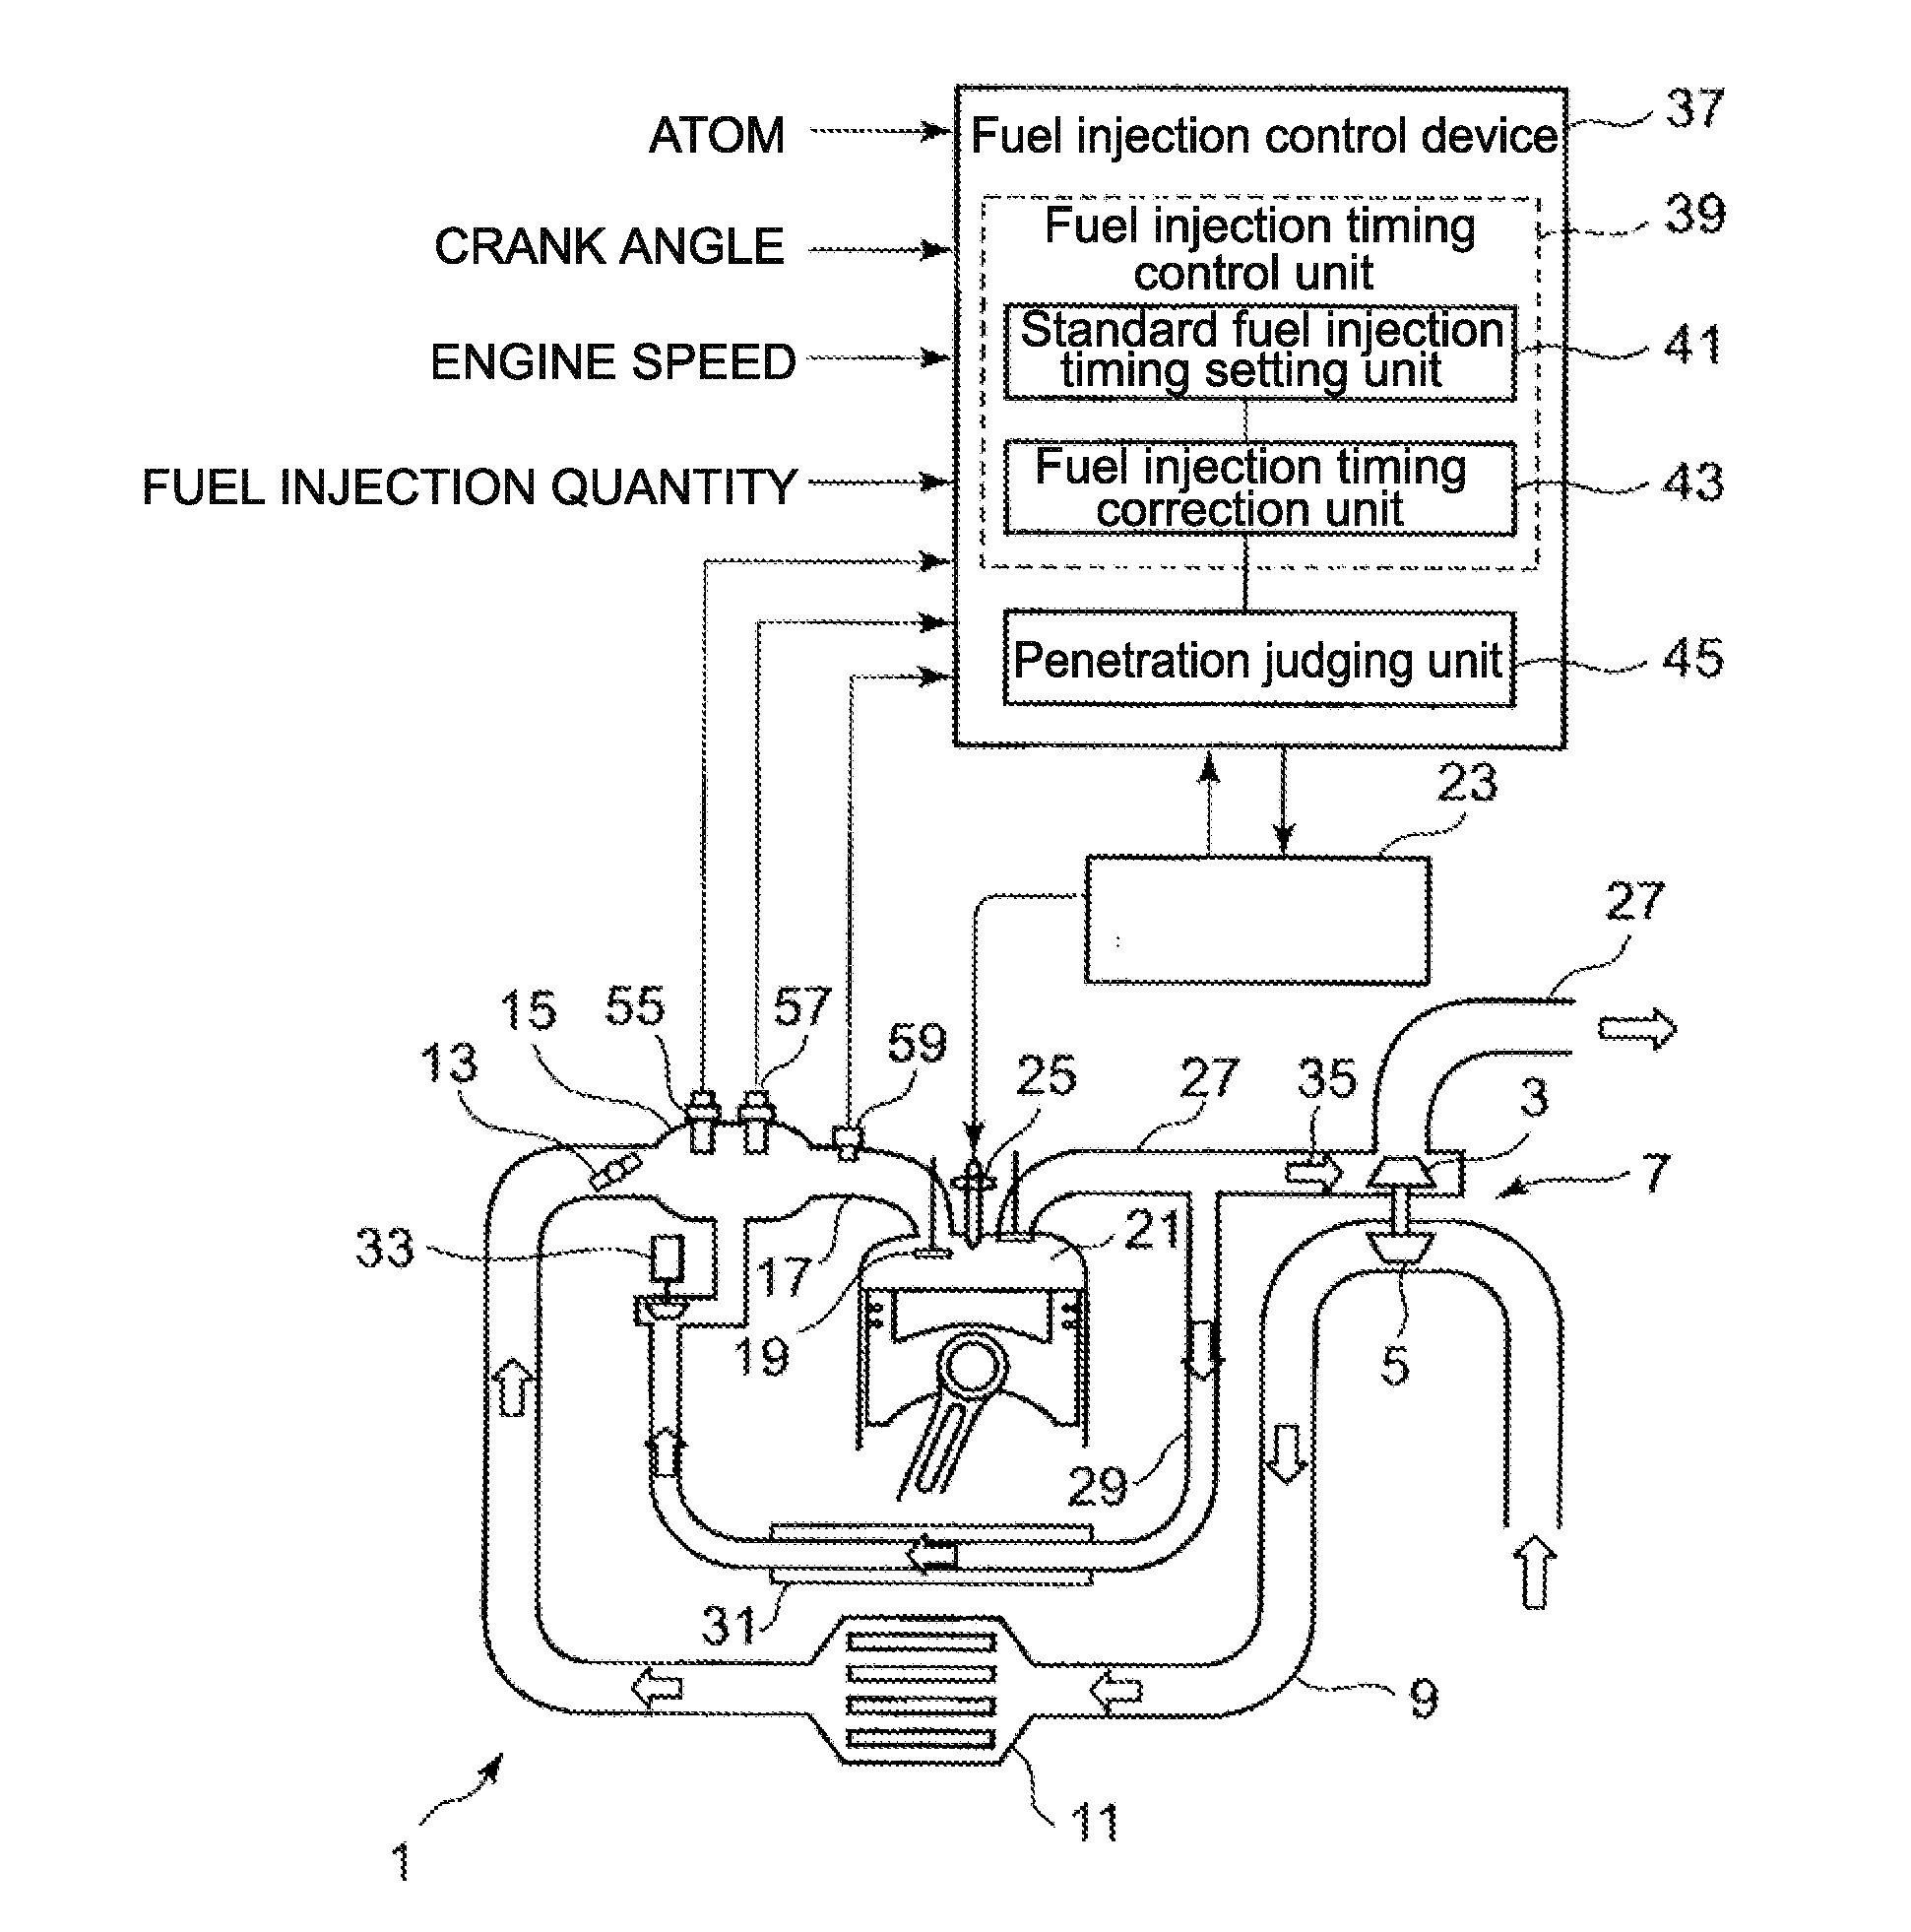 Fuel injection control device and method of diesel engine